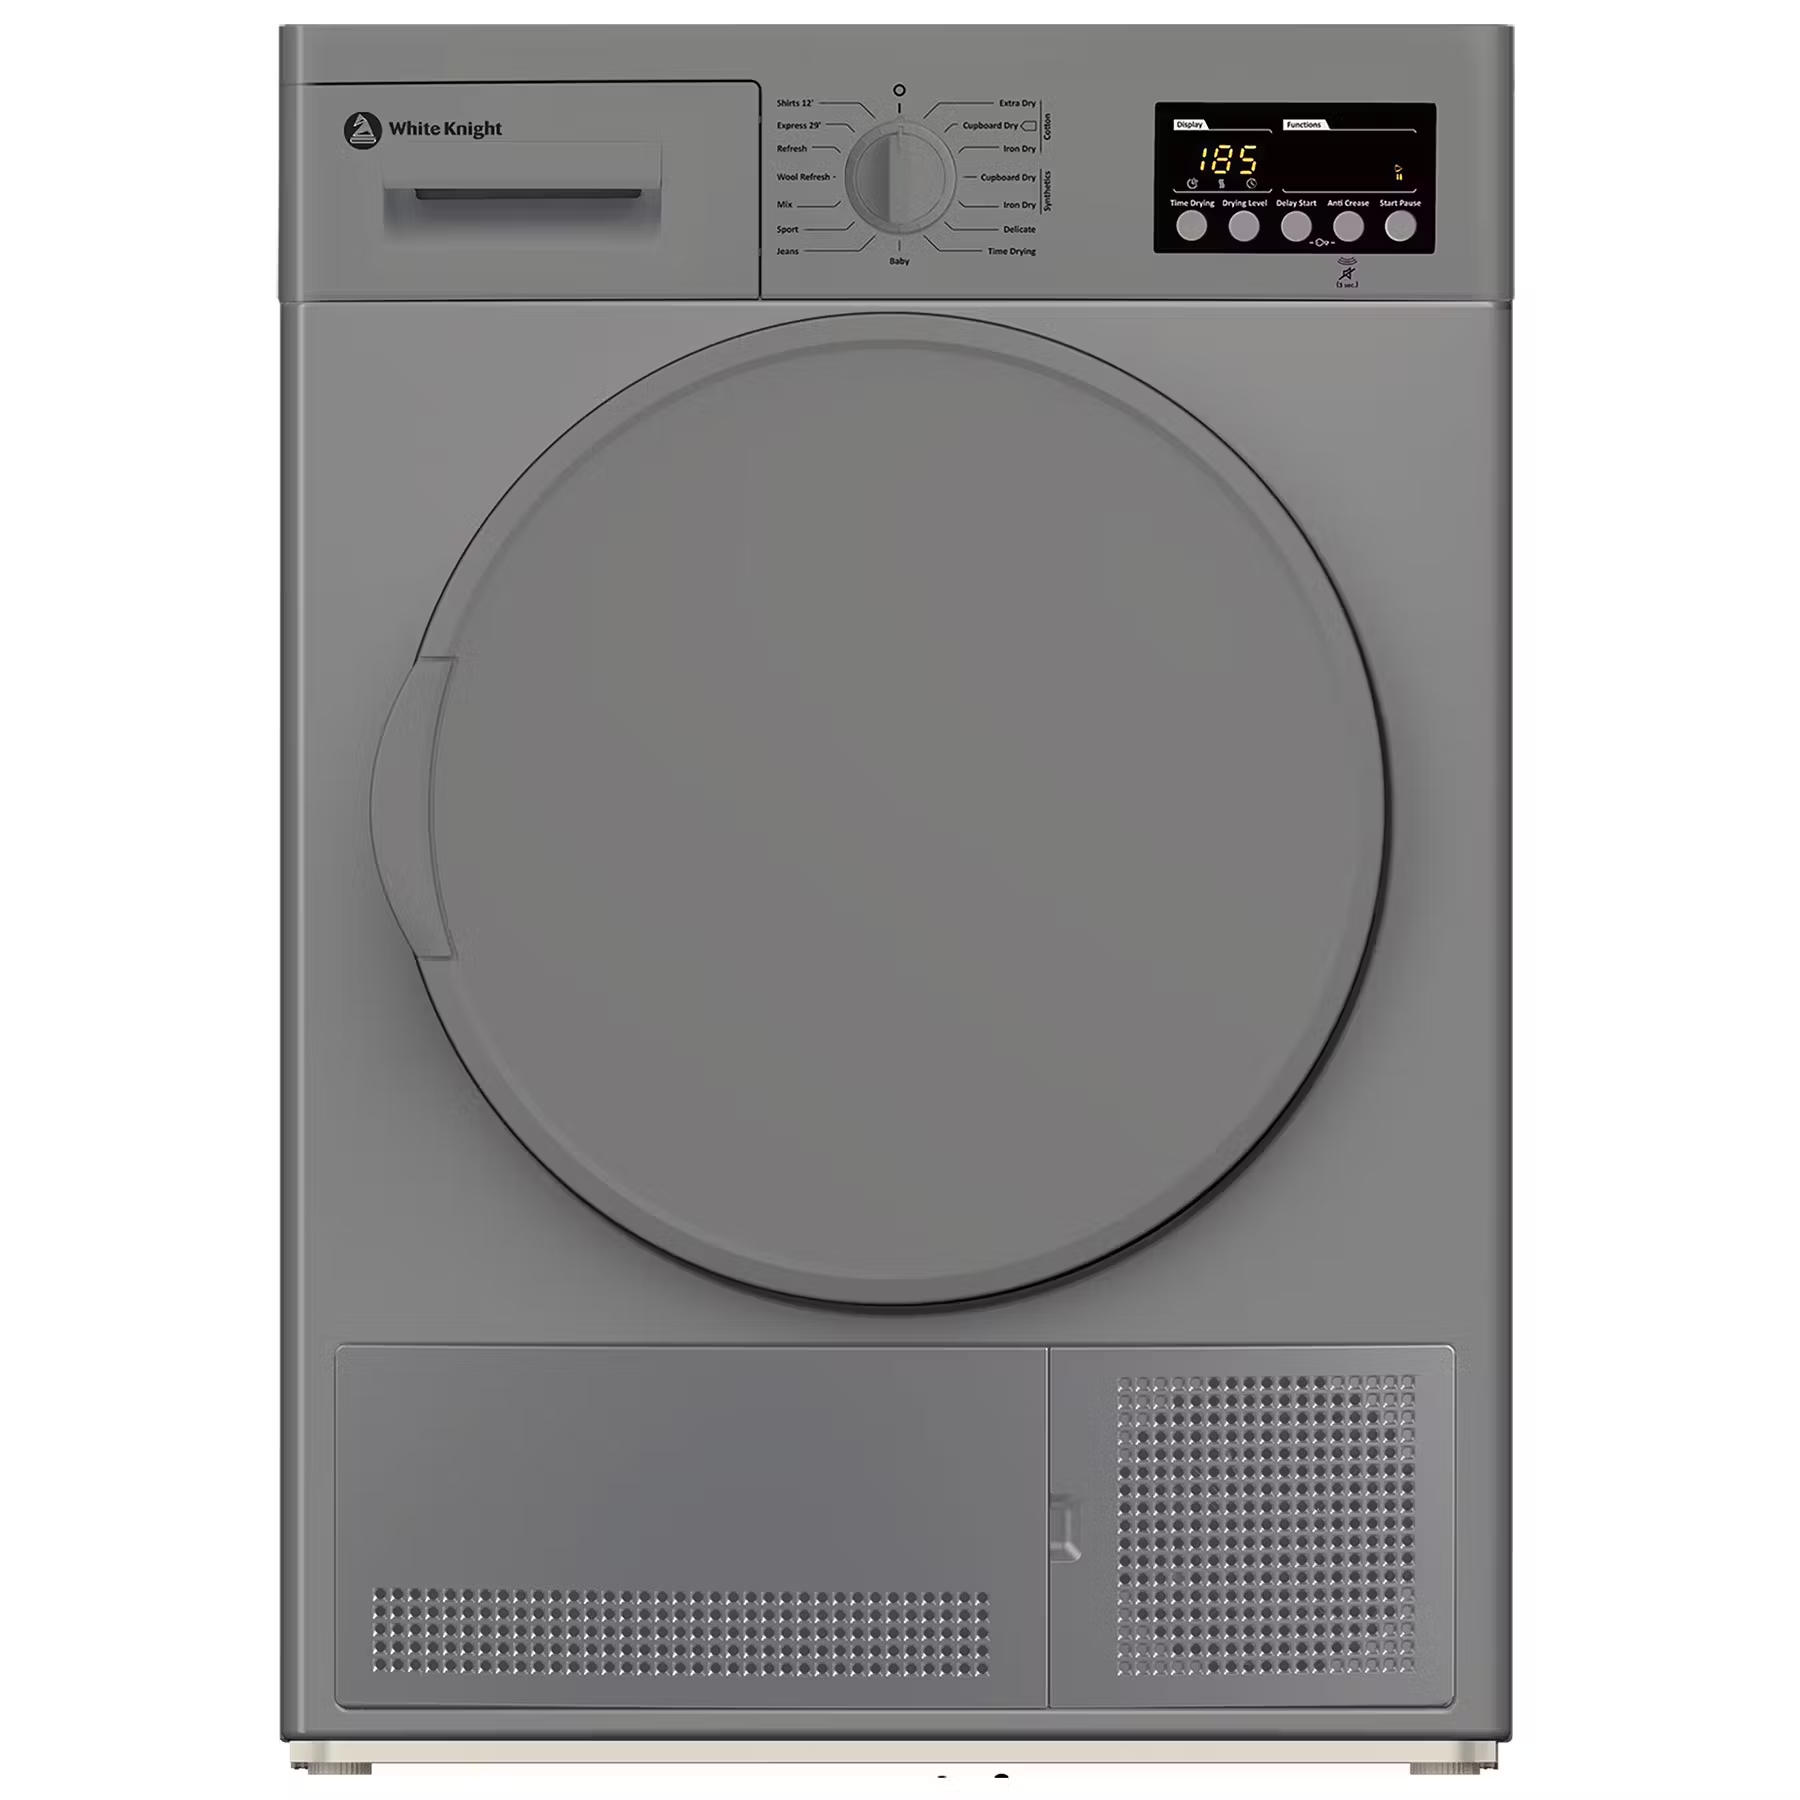 White Knight DAB96V8S 8kg Condenser Dryer in Silver B Rated Sensor Dry